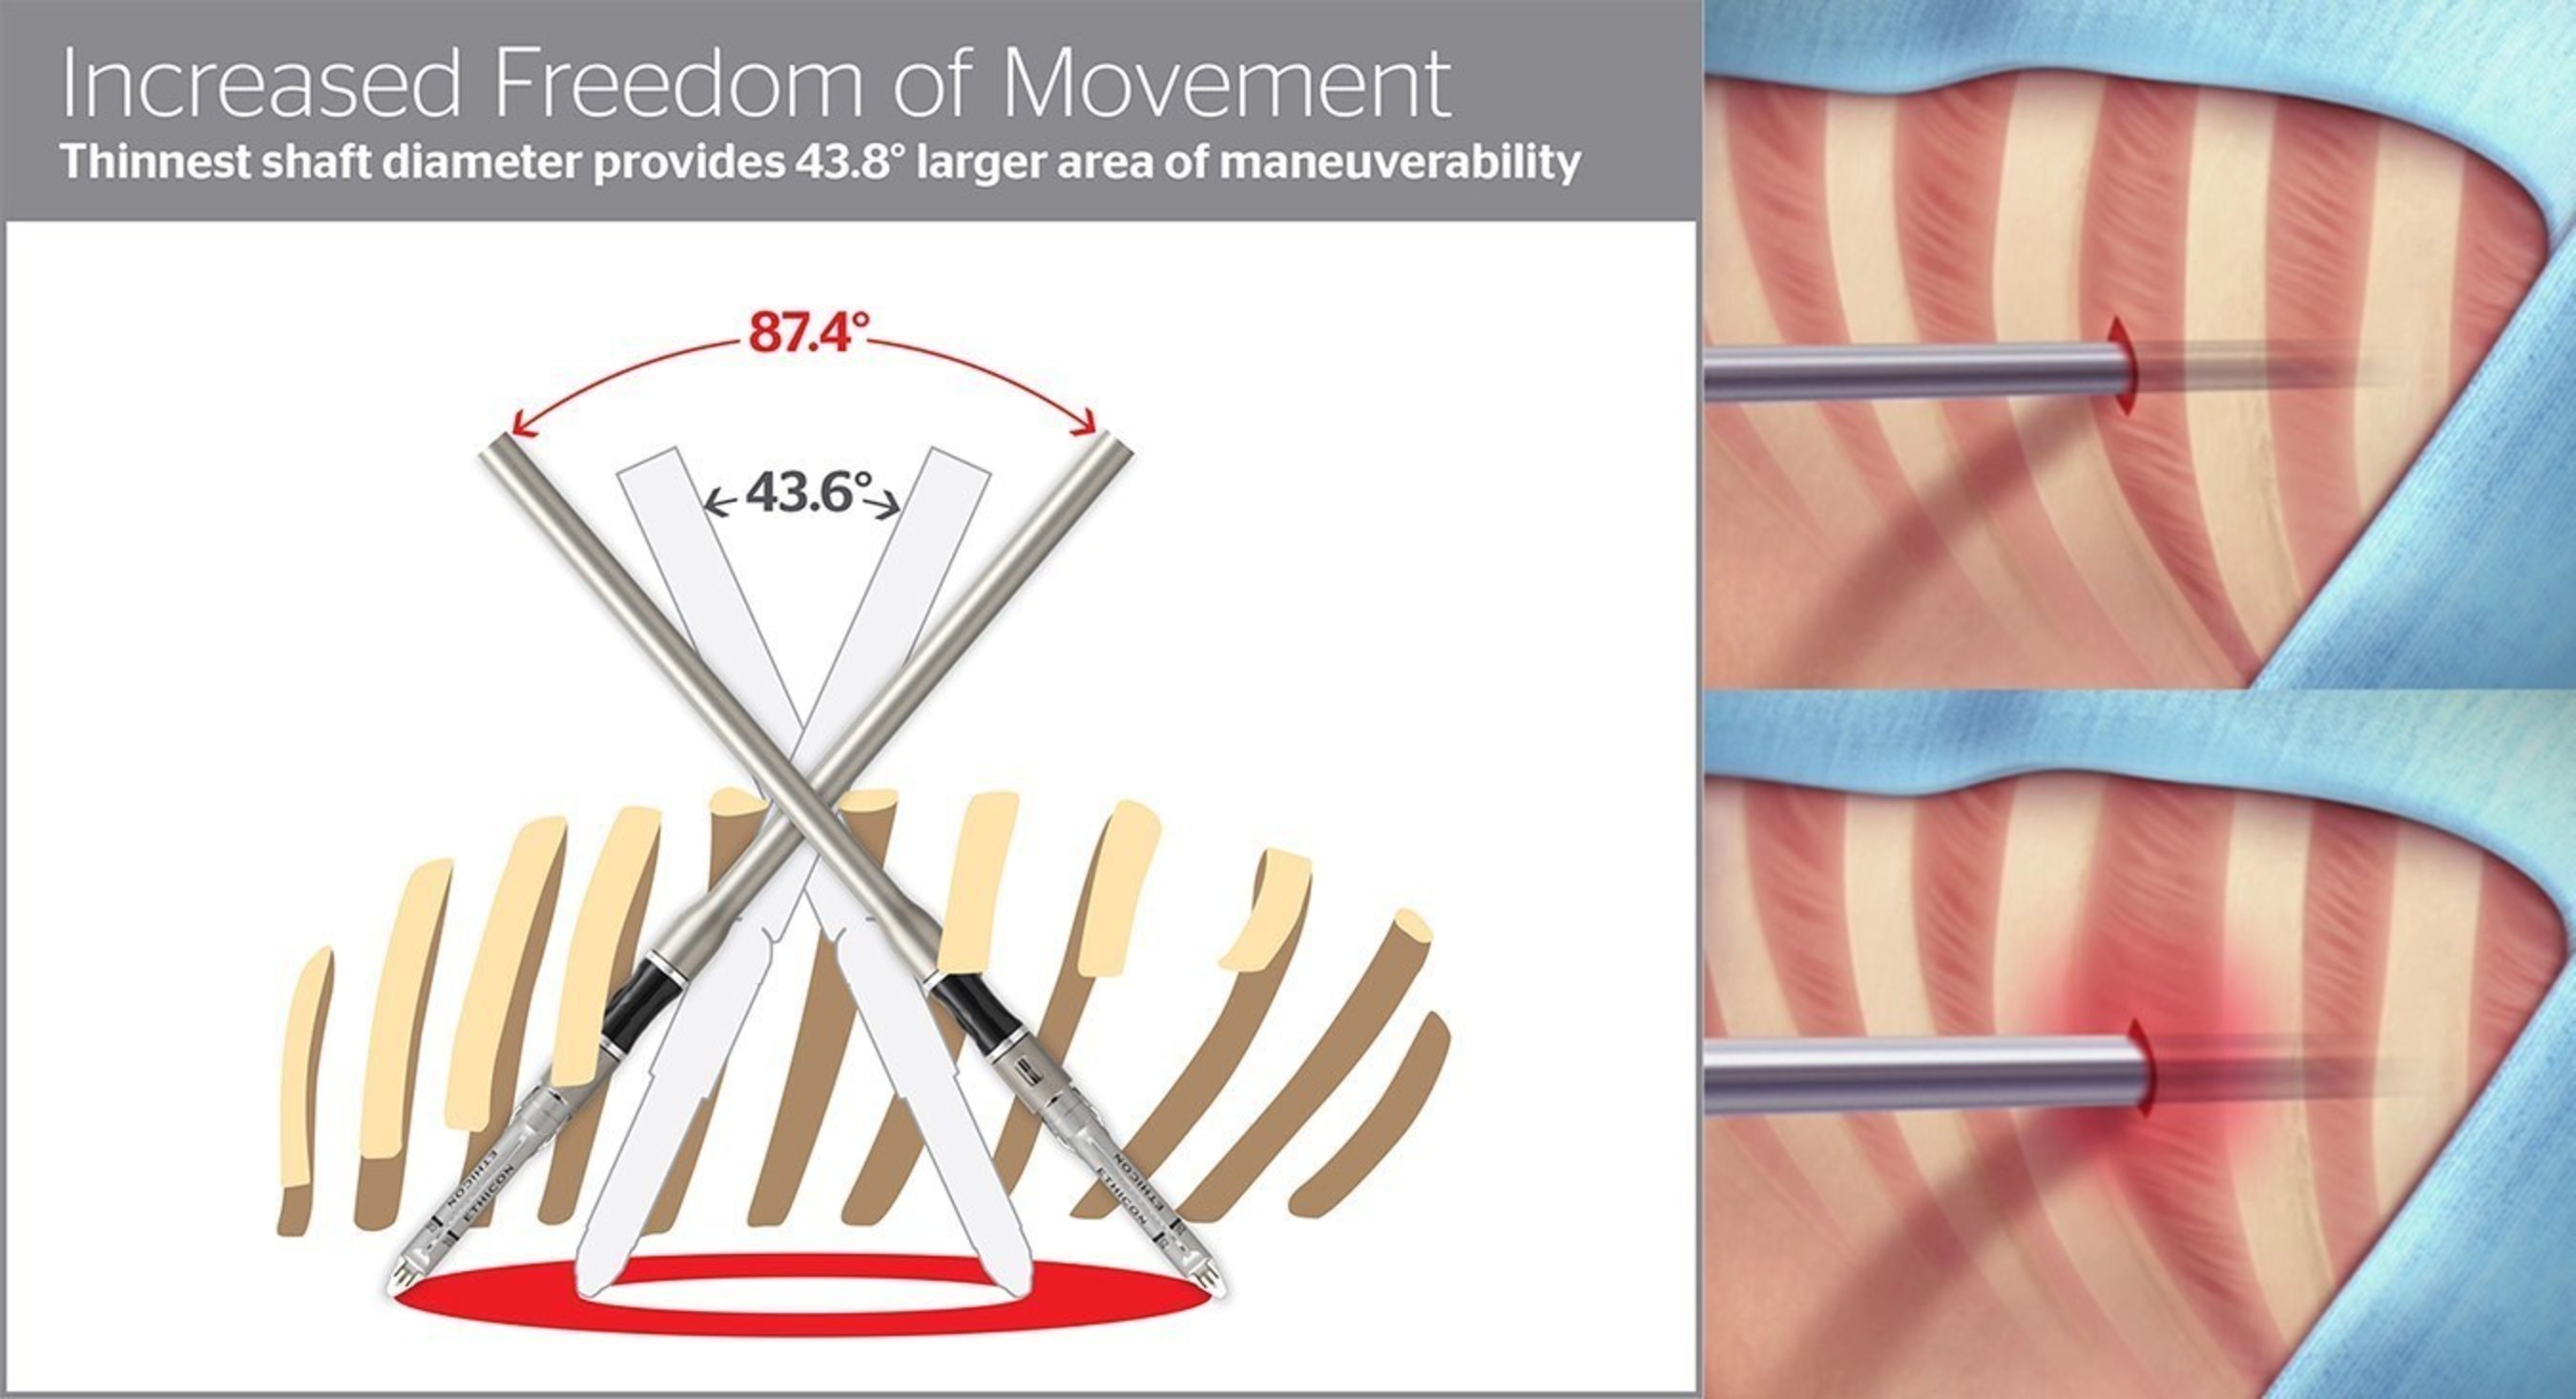 Increased Freedom of Movement